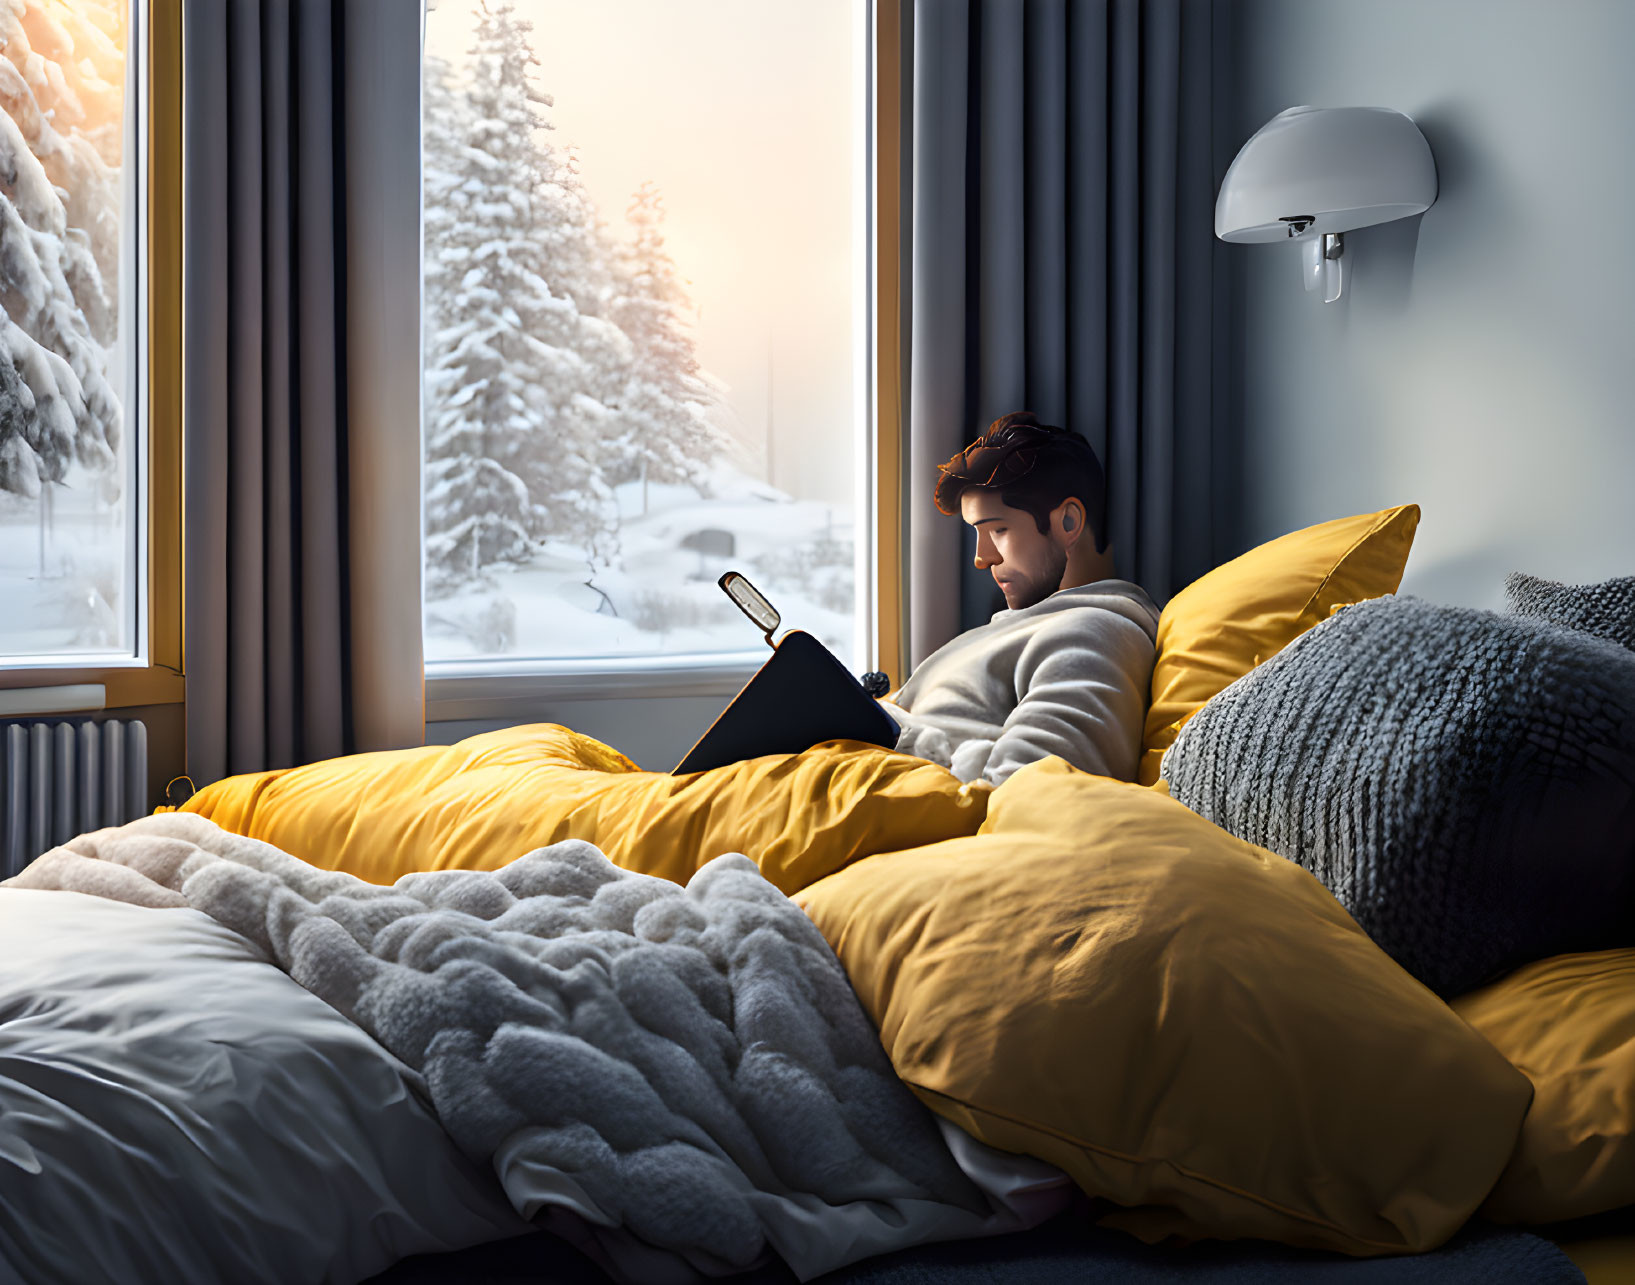 Person sitting in bed with tablet, snowy landscape visible through window